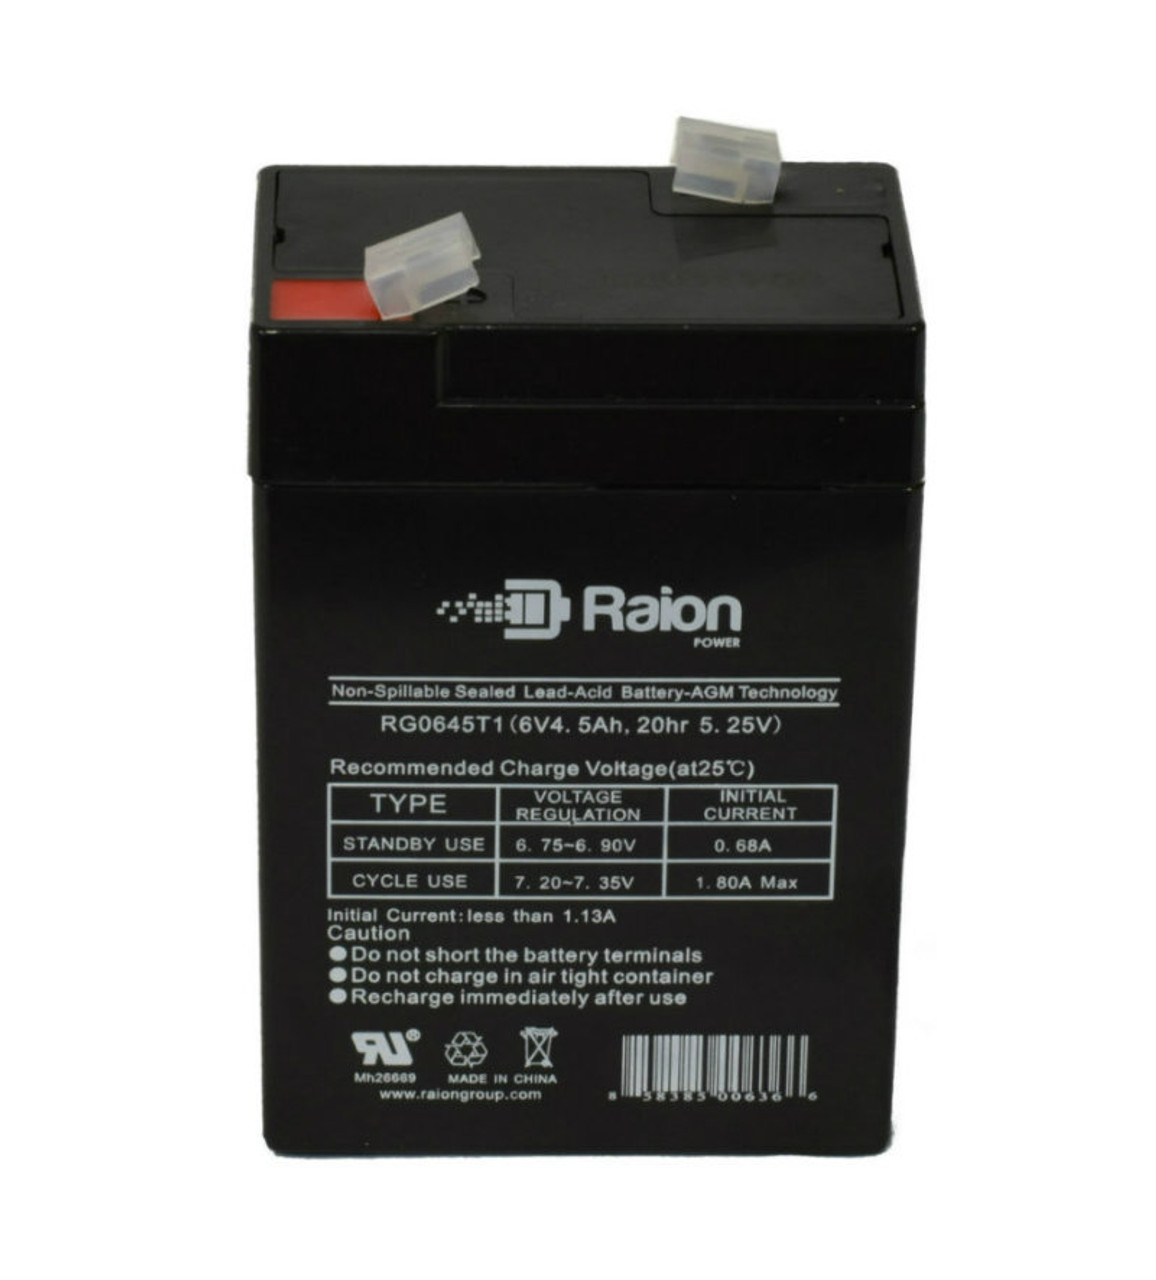 Raion Power RG0645T1 Replacement Battery Cartridge for Power Energy GB6-4.2